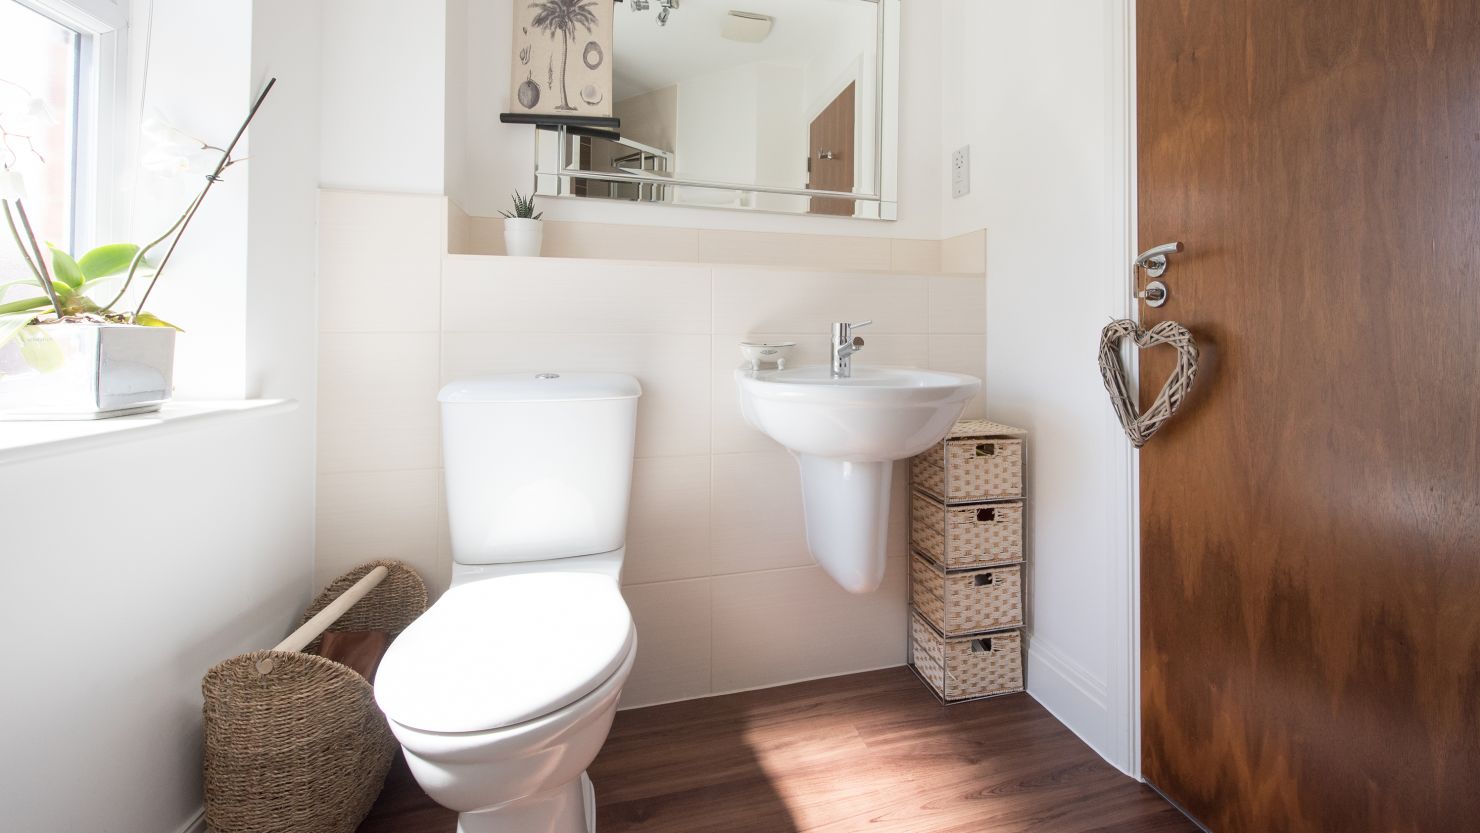 Read This Before You Buy a Toilet - This Old House